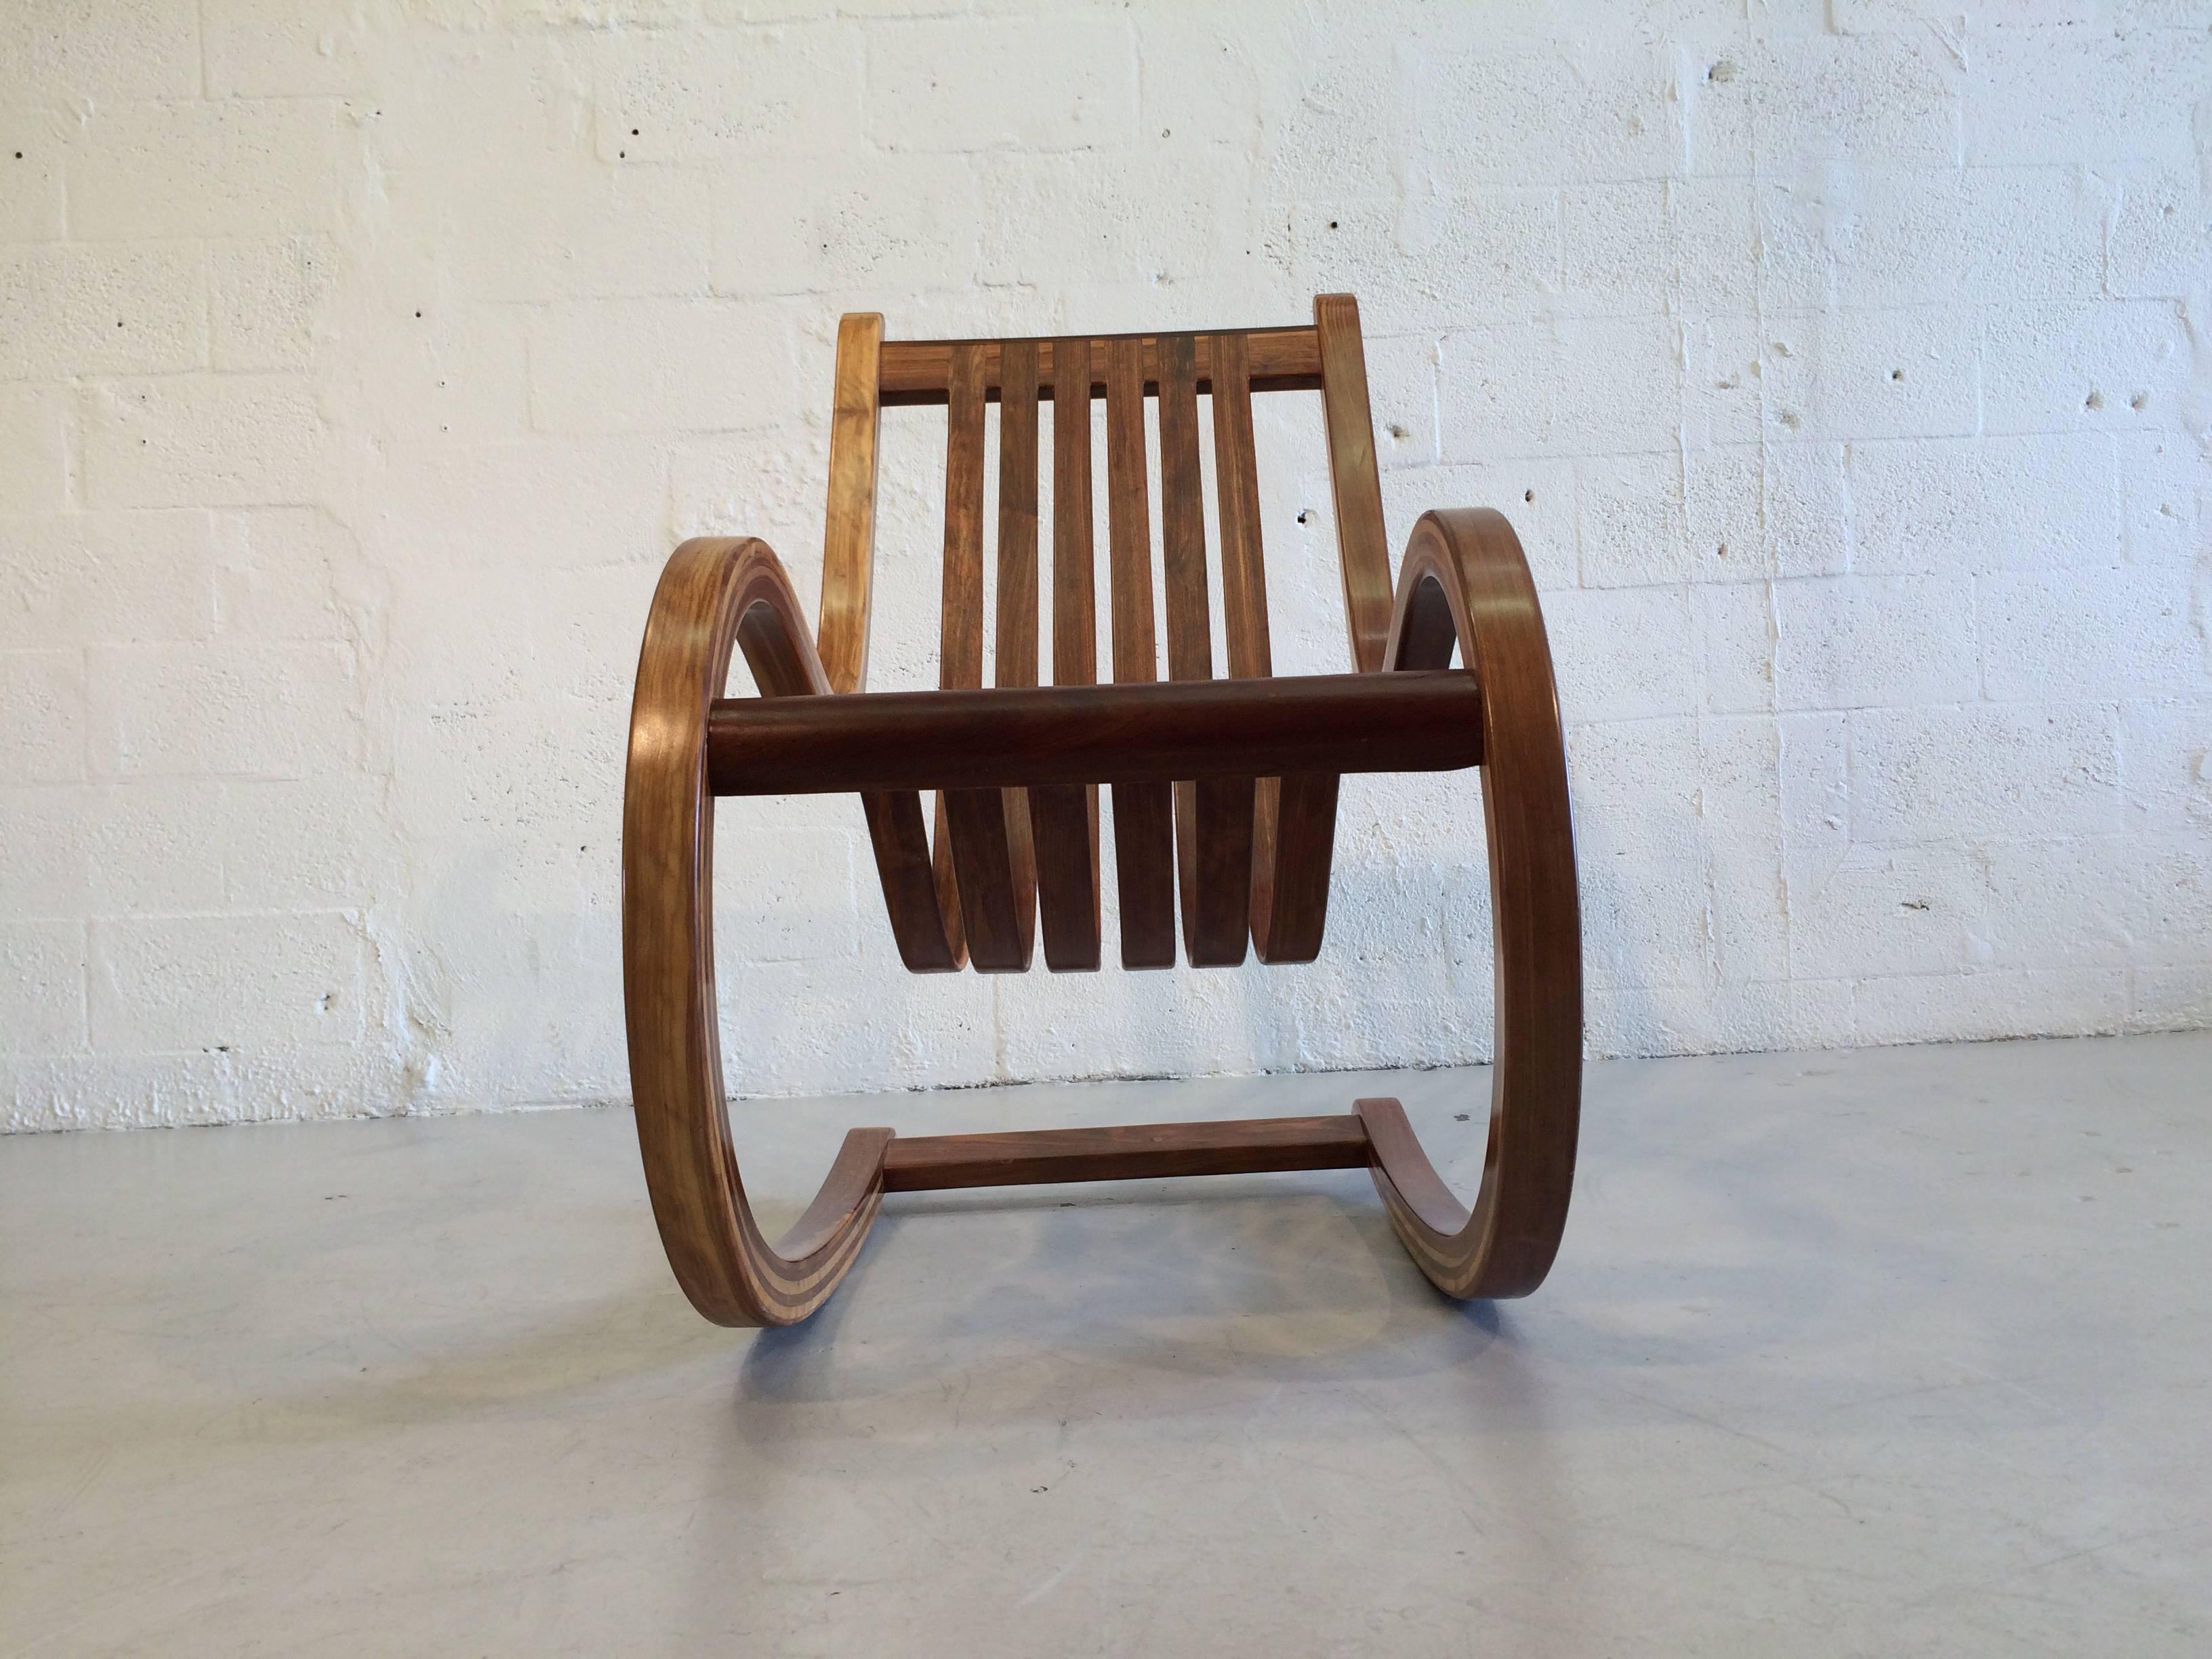 Bentwood Studio Crafted Rocking Chair, Mexico Rocker